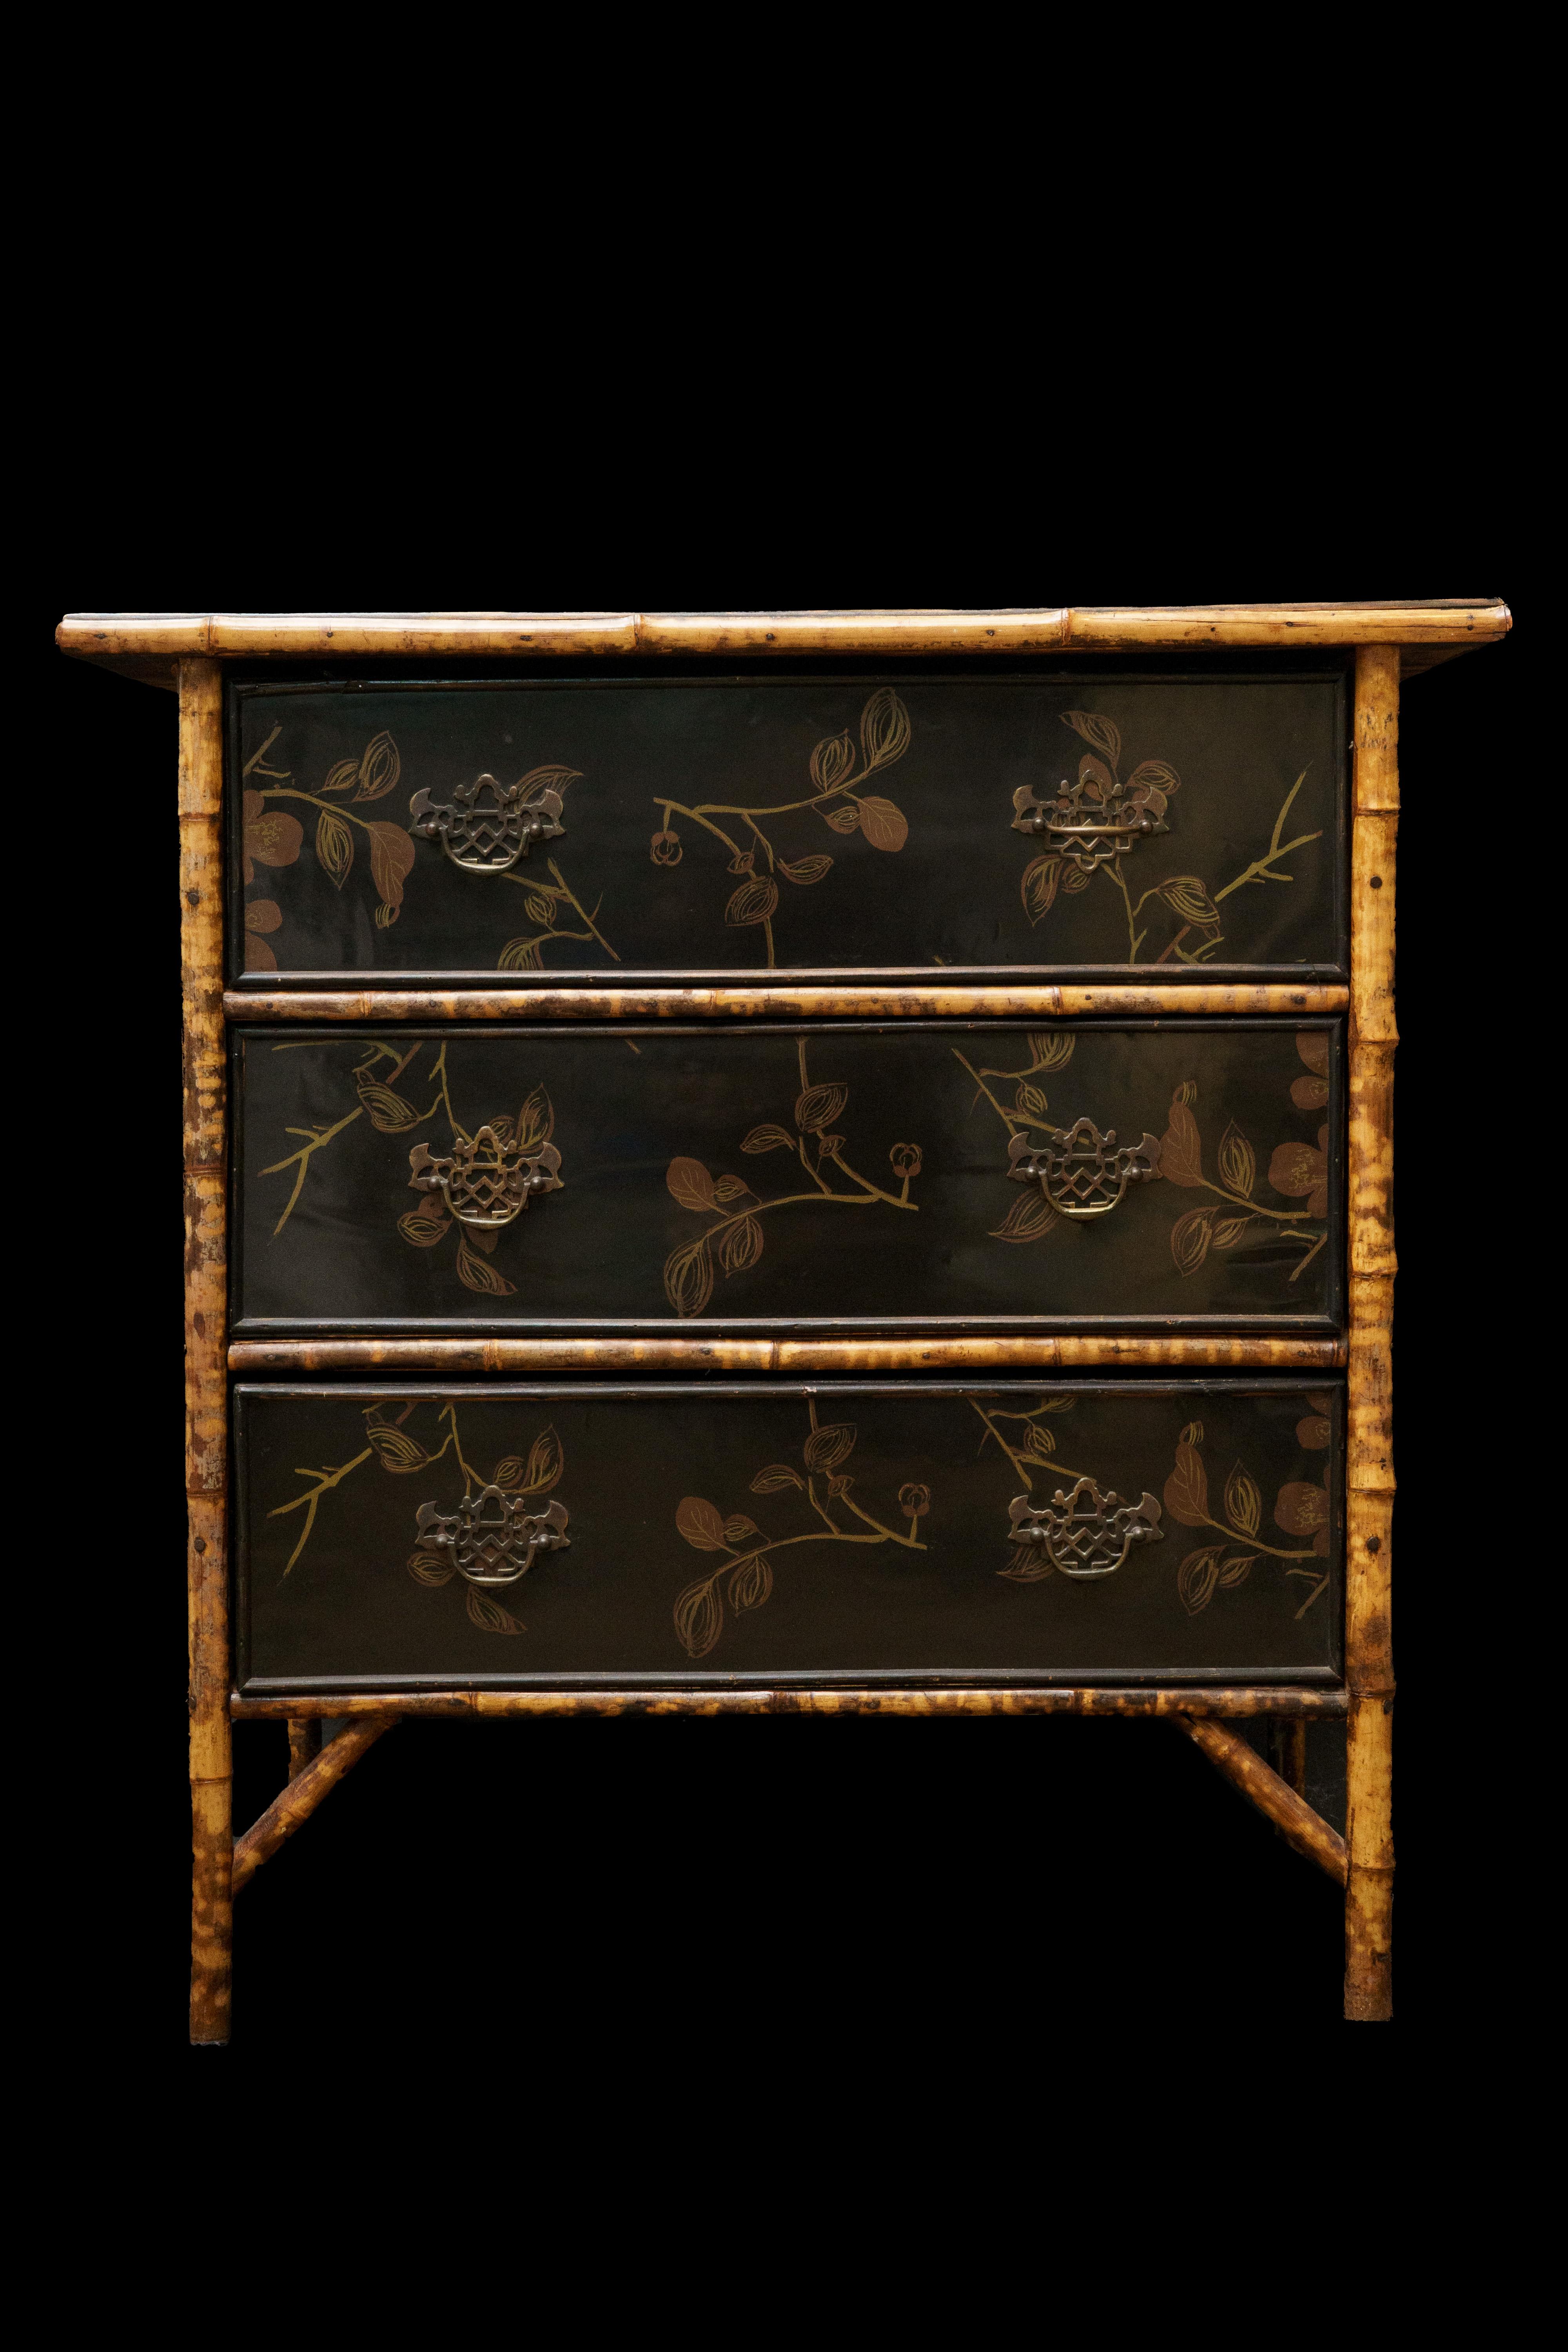 Chinese chest of drawers:

Measures: 36